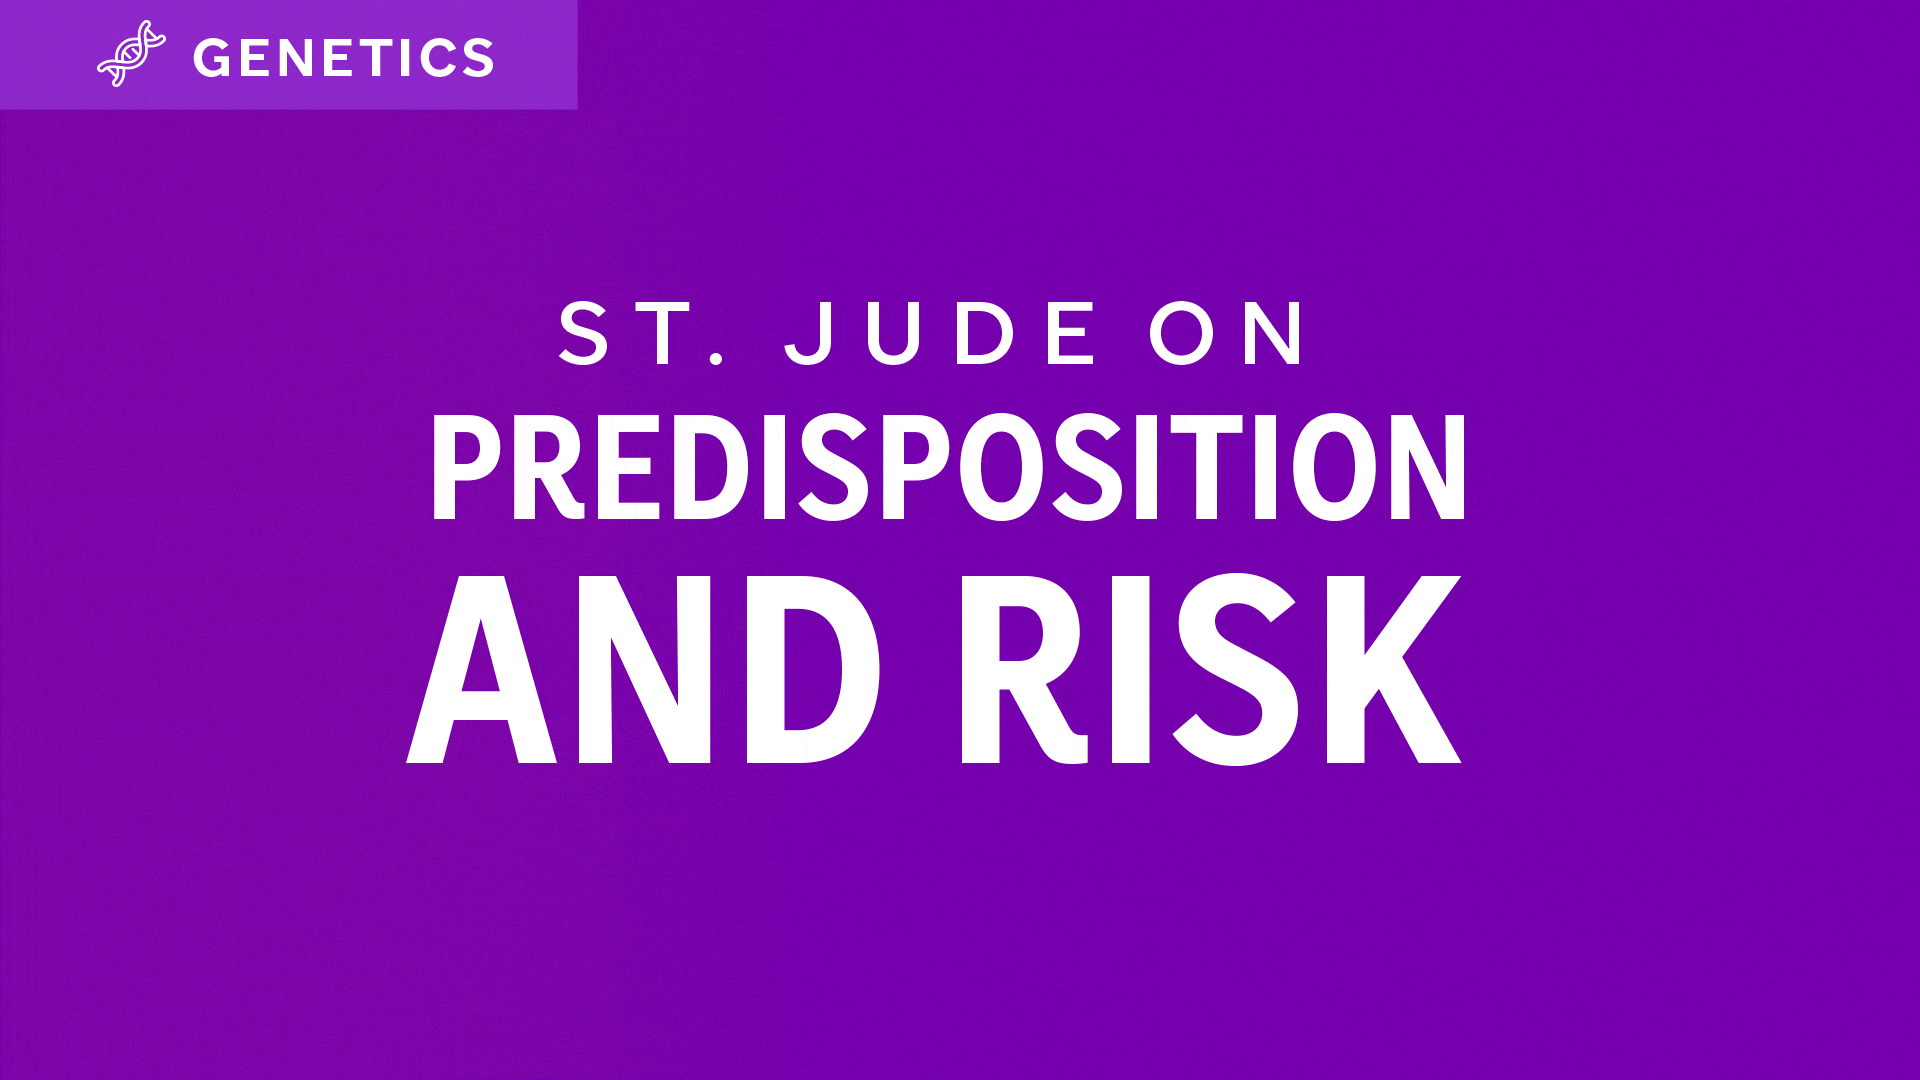 St. Jude On Predisposition and Risk